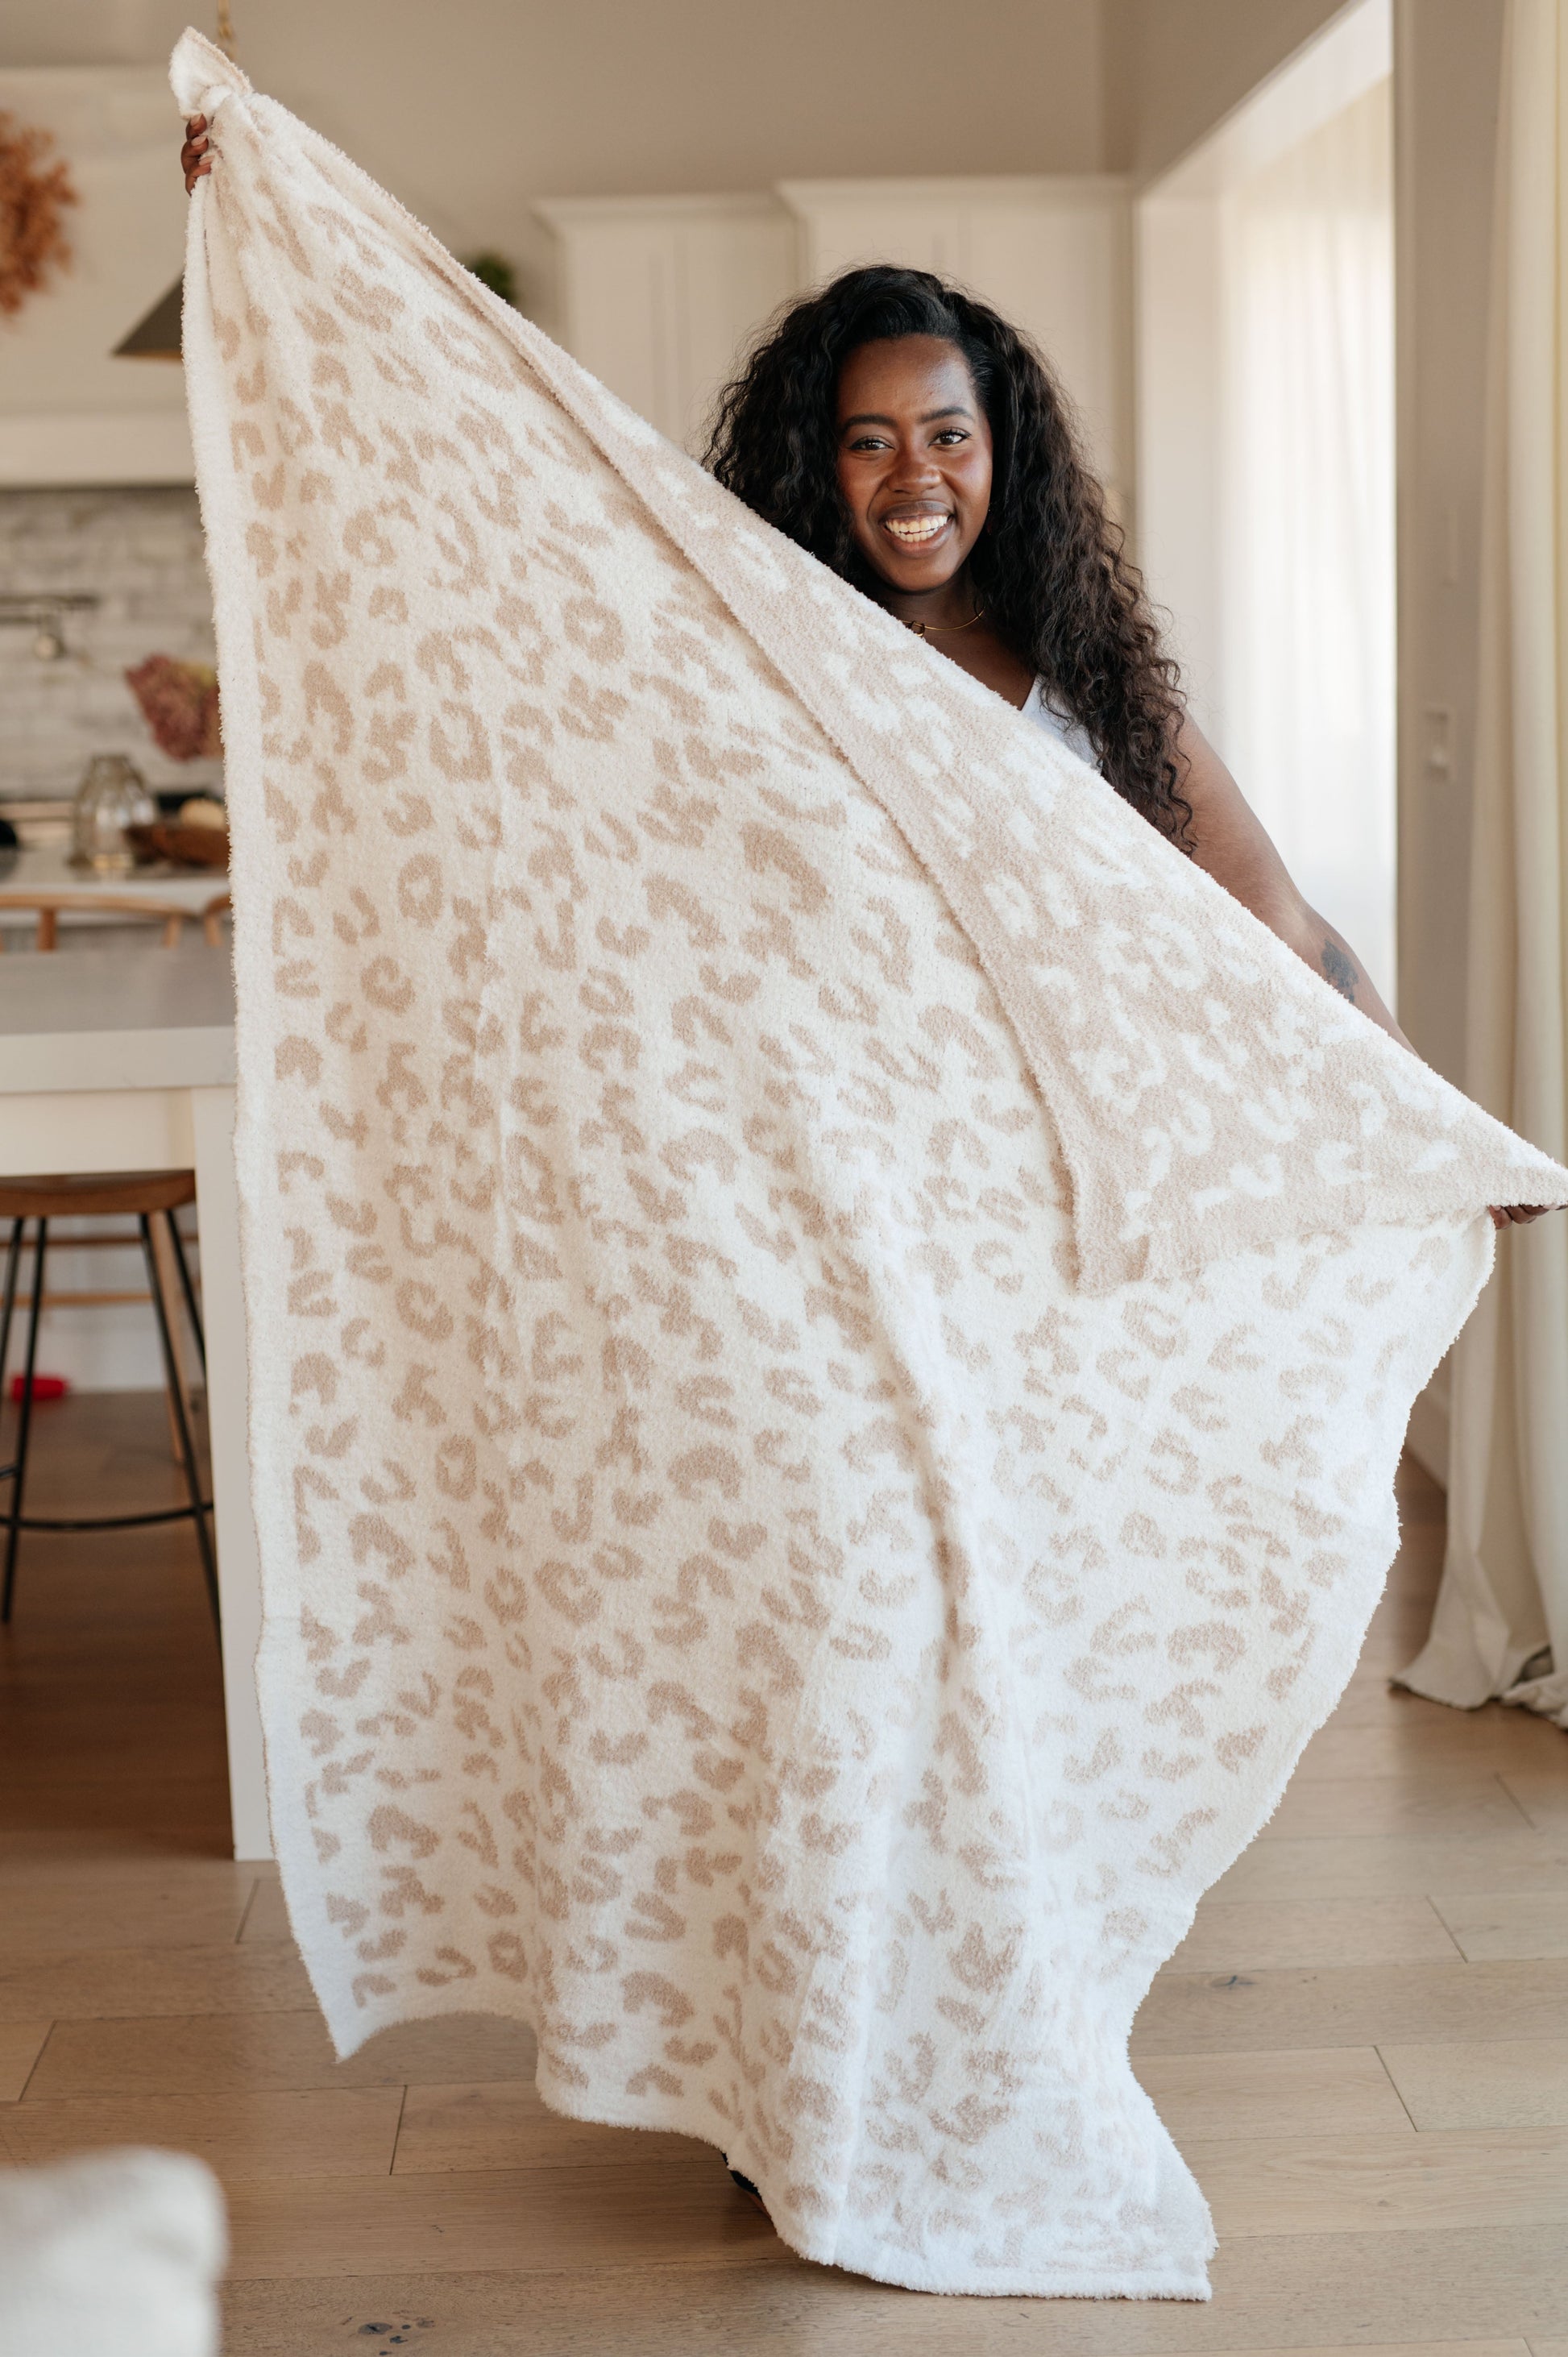 The Ari Blanket by Cuddle Culture is as luxurious as it looks - plush and comfy as a cloud. The deliciously soft fabric is inviting and lightweight, truly comforting on the skin. Just like your favorite teddy bear, only softer. Layer your bed or couch and indulge in cloud-like comfort unlike anything you’ve ever felt before. The Ari is breathable, washable, ultra-soft, and of course, beautiful. A luxurious fabric to keep warm with in colder seasons, but lightweight enough to keep out all year round.